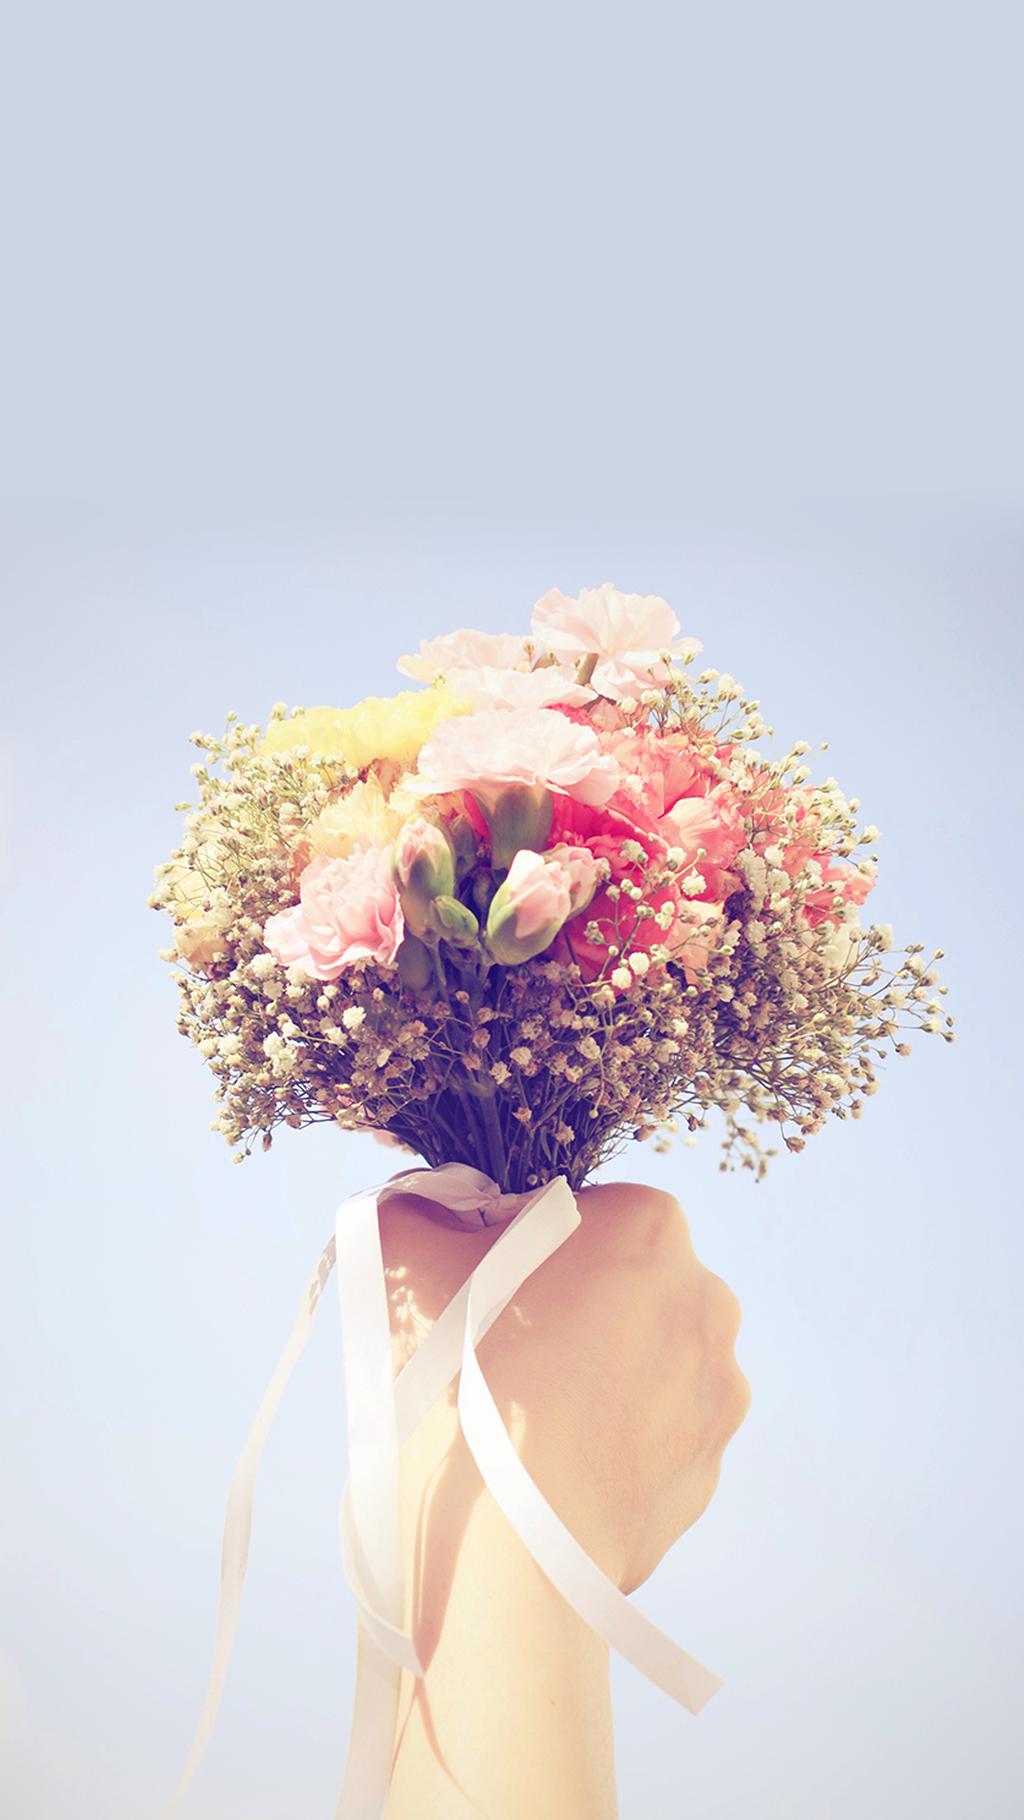 A small and fresh bouquet of flowers